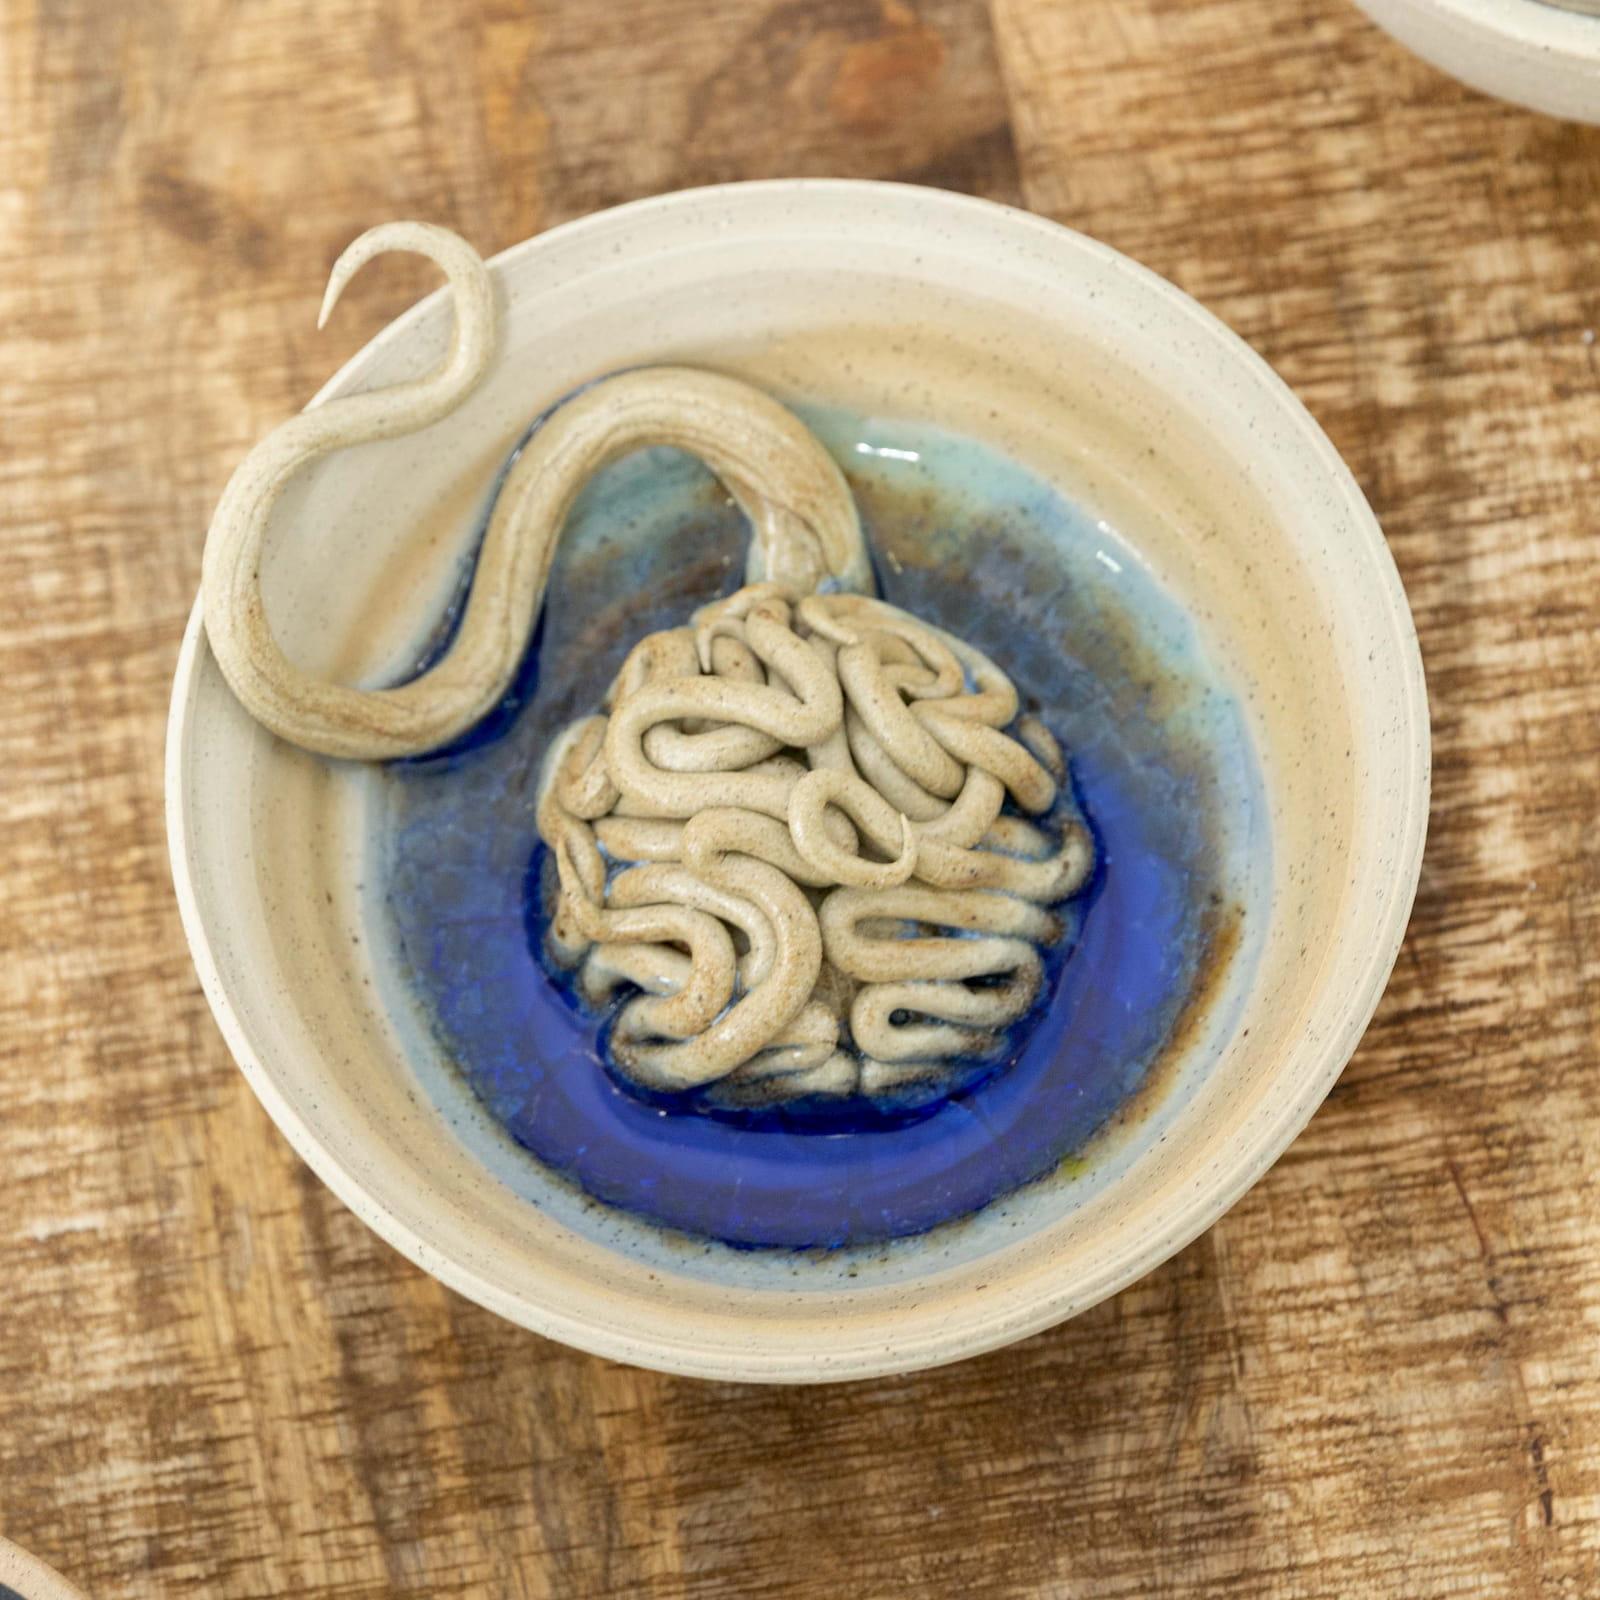 A photo of a ceramic sculpture resembling a brain in a bowl with a tendril creeping out